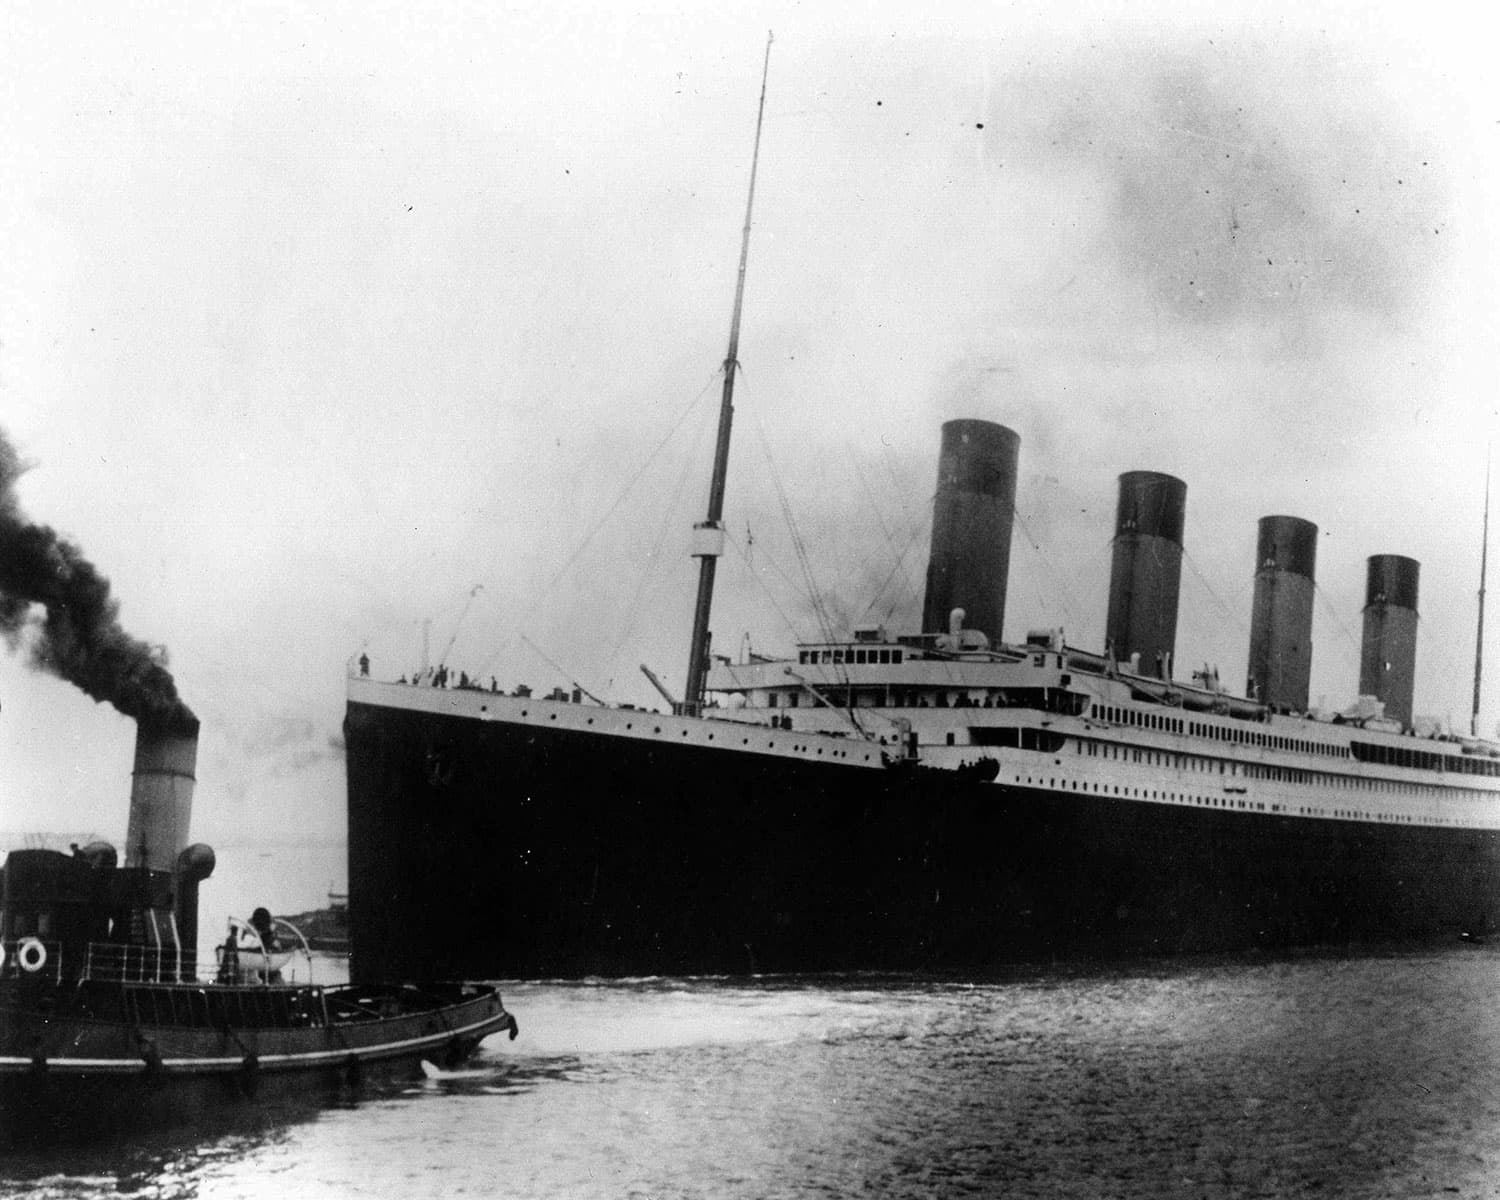 The British liner Titanic sails out of Southampton, England, at the start of its doomed voyage on April 10, 1912. (AP Photo)